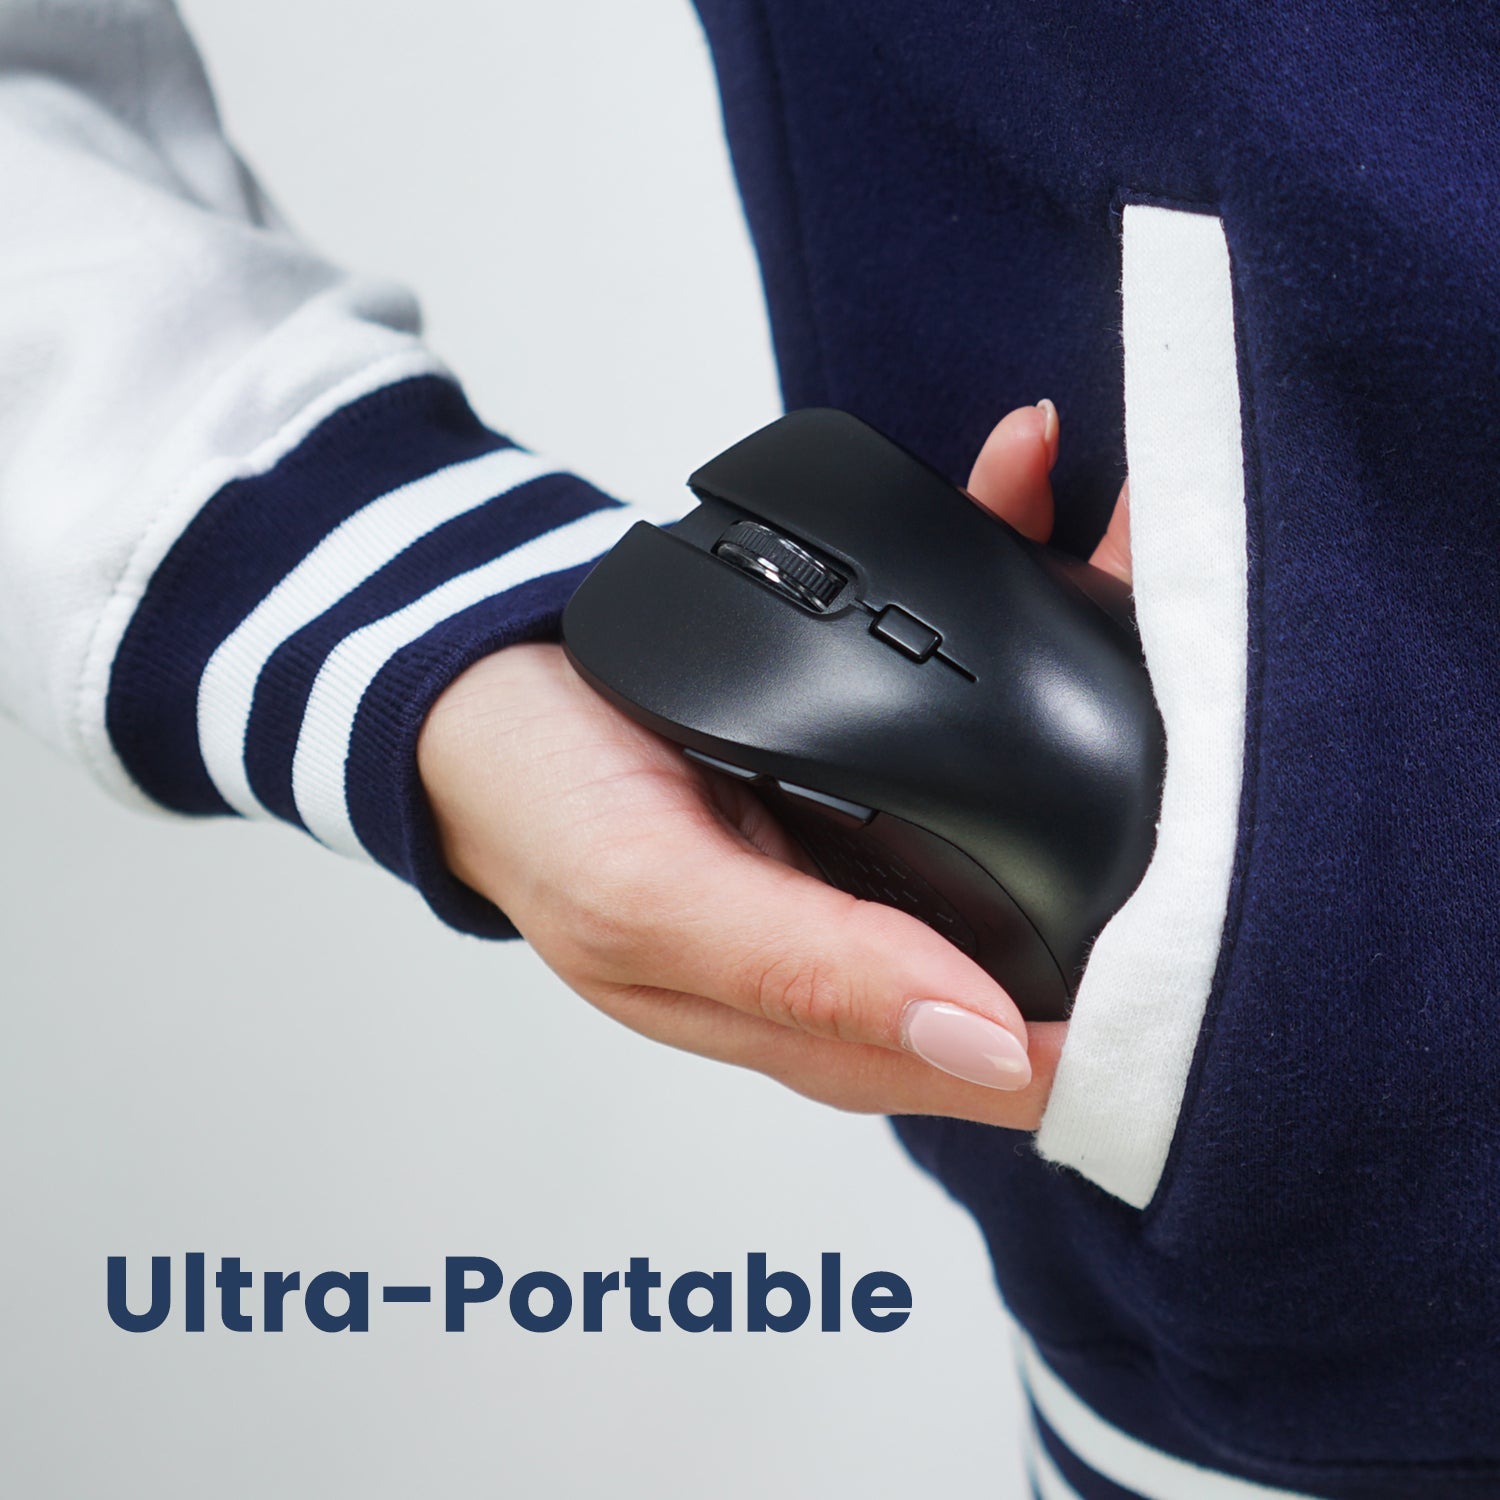 PERIMICE-611 Wireless Mini Mouse, Portable Mouse for Laptops and Tablets - Perixx Europe